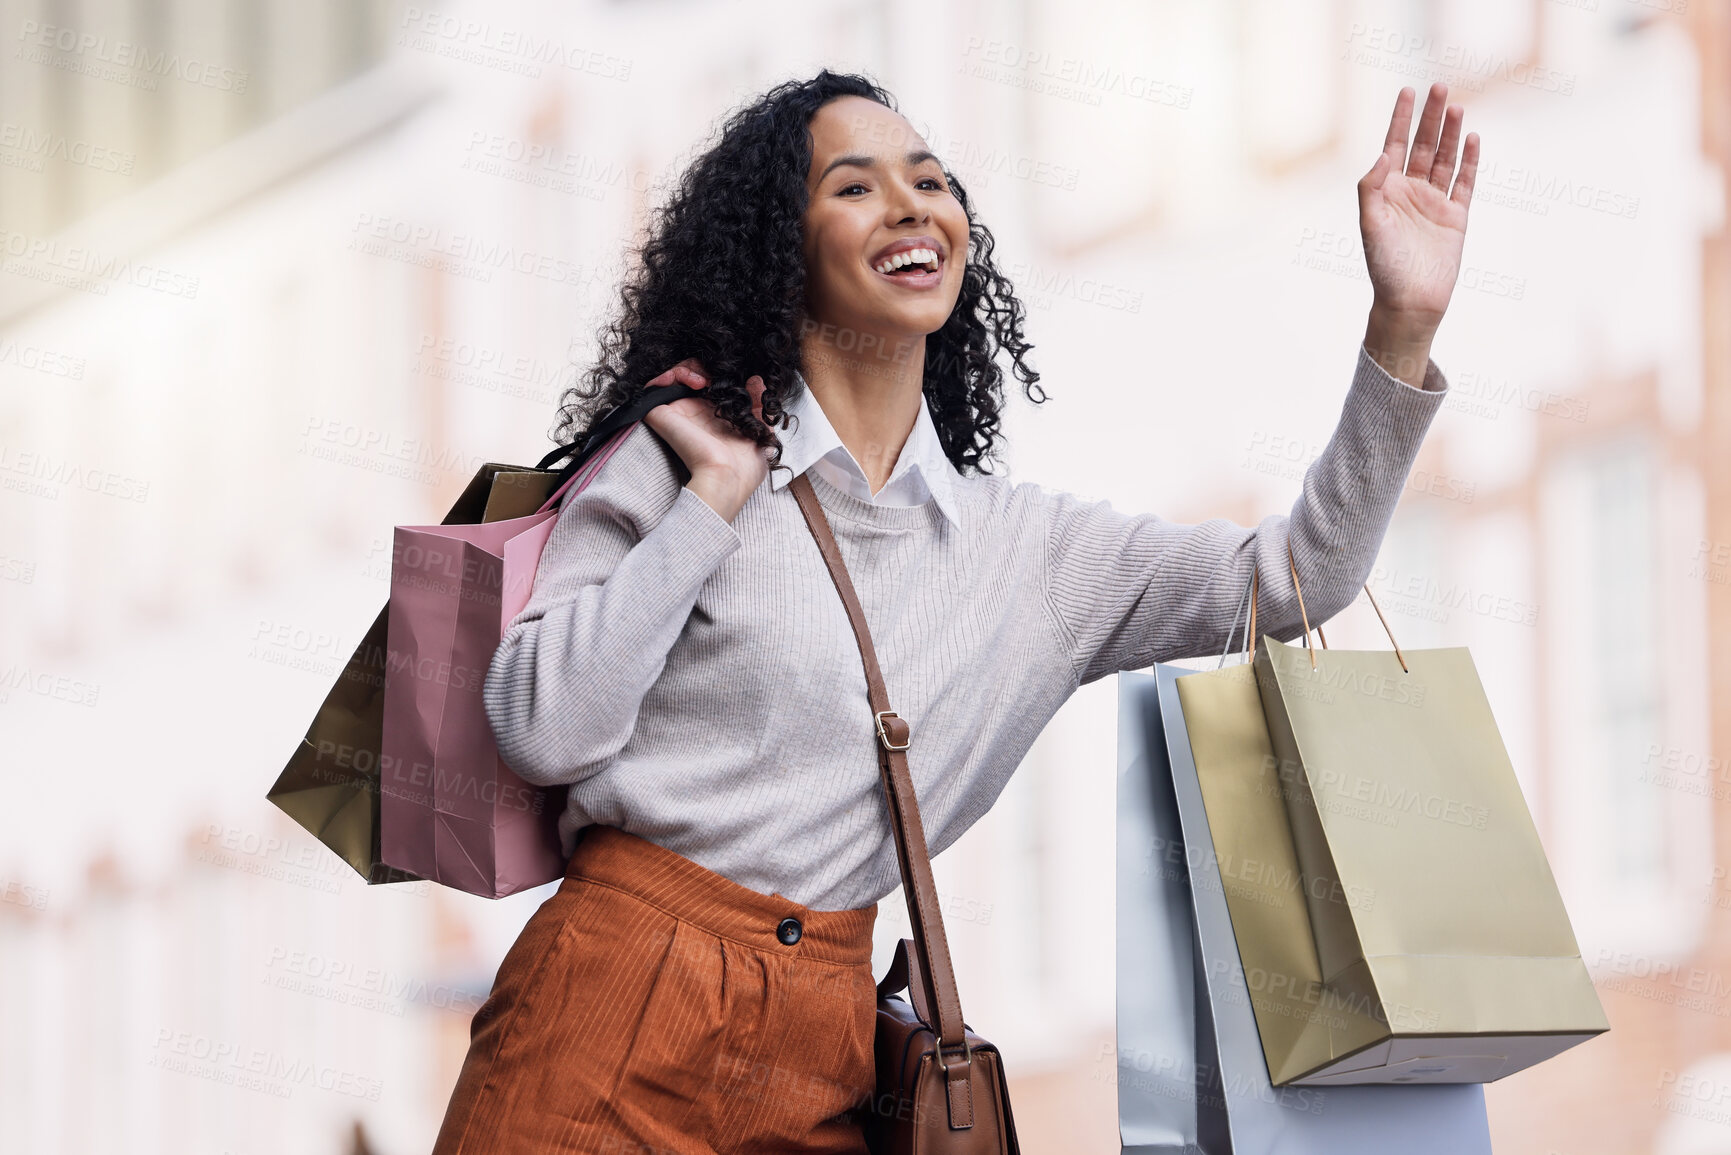 Buy stock photo Shopping, travel and woman try to stop taxi for transport in urban city after shopping spree of fashion, sales or discount clothes. Retail, bag and young black customer with hand gesture for cab ride